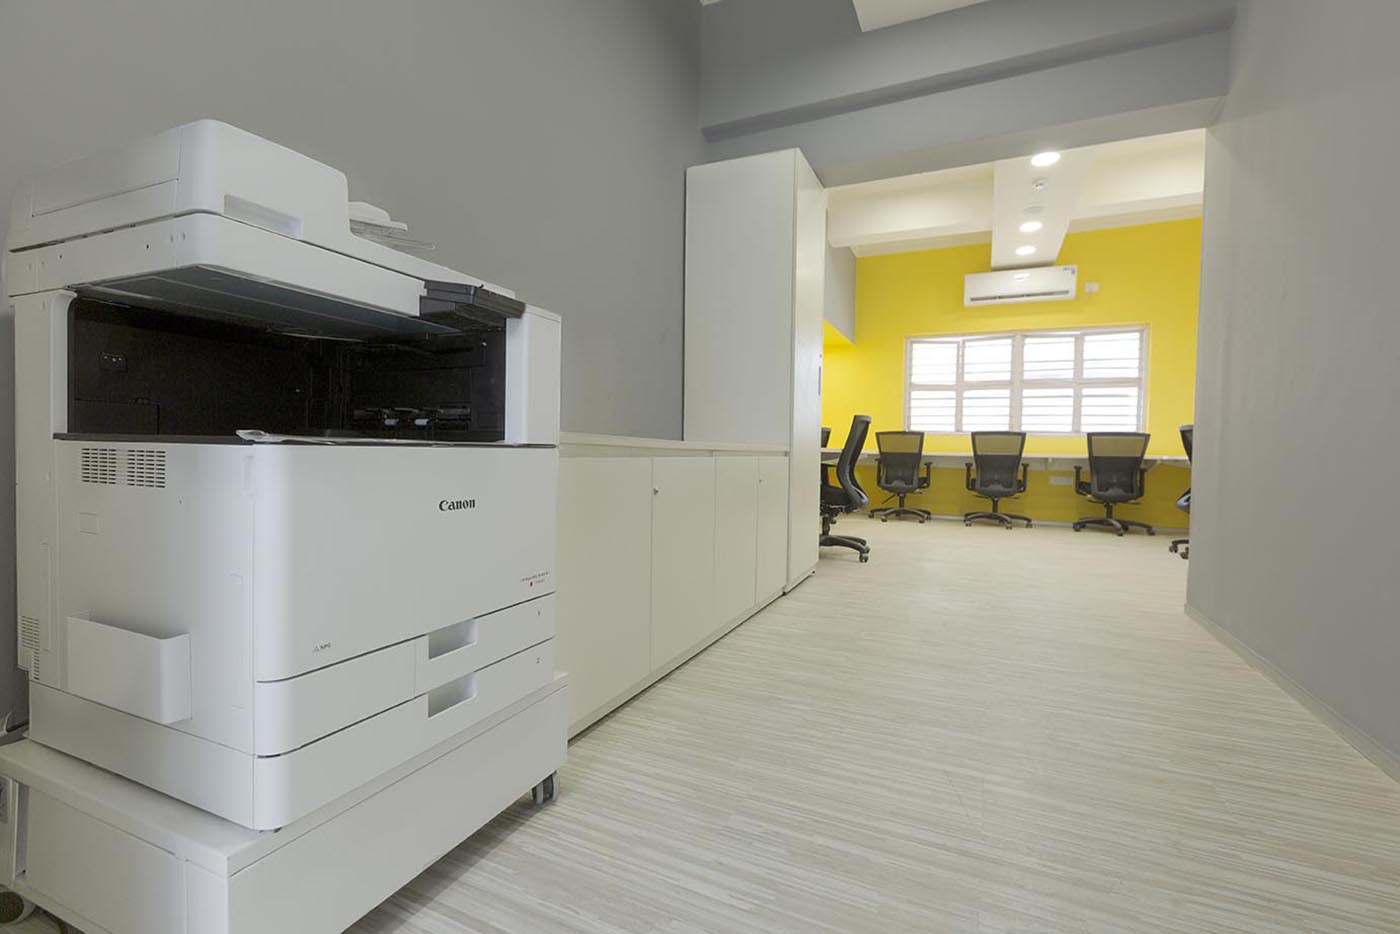 Amenities at Cove Offices’ shared office spaces for rent